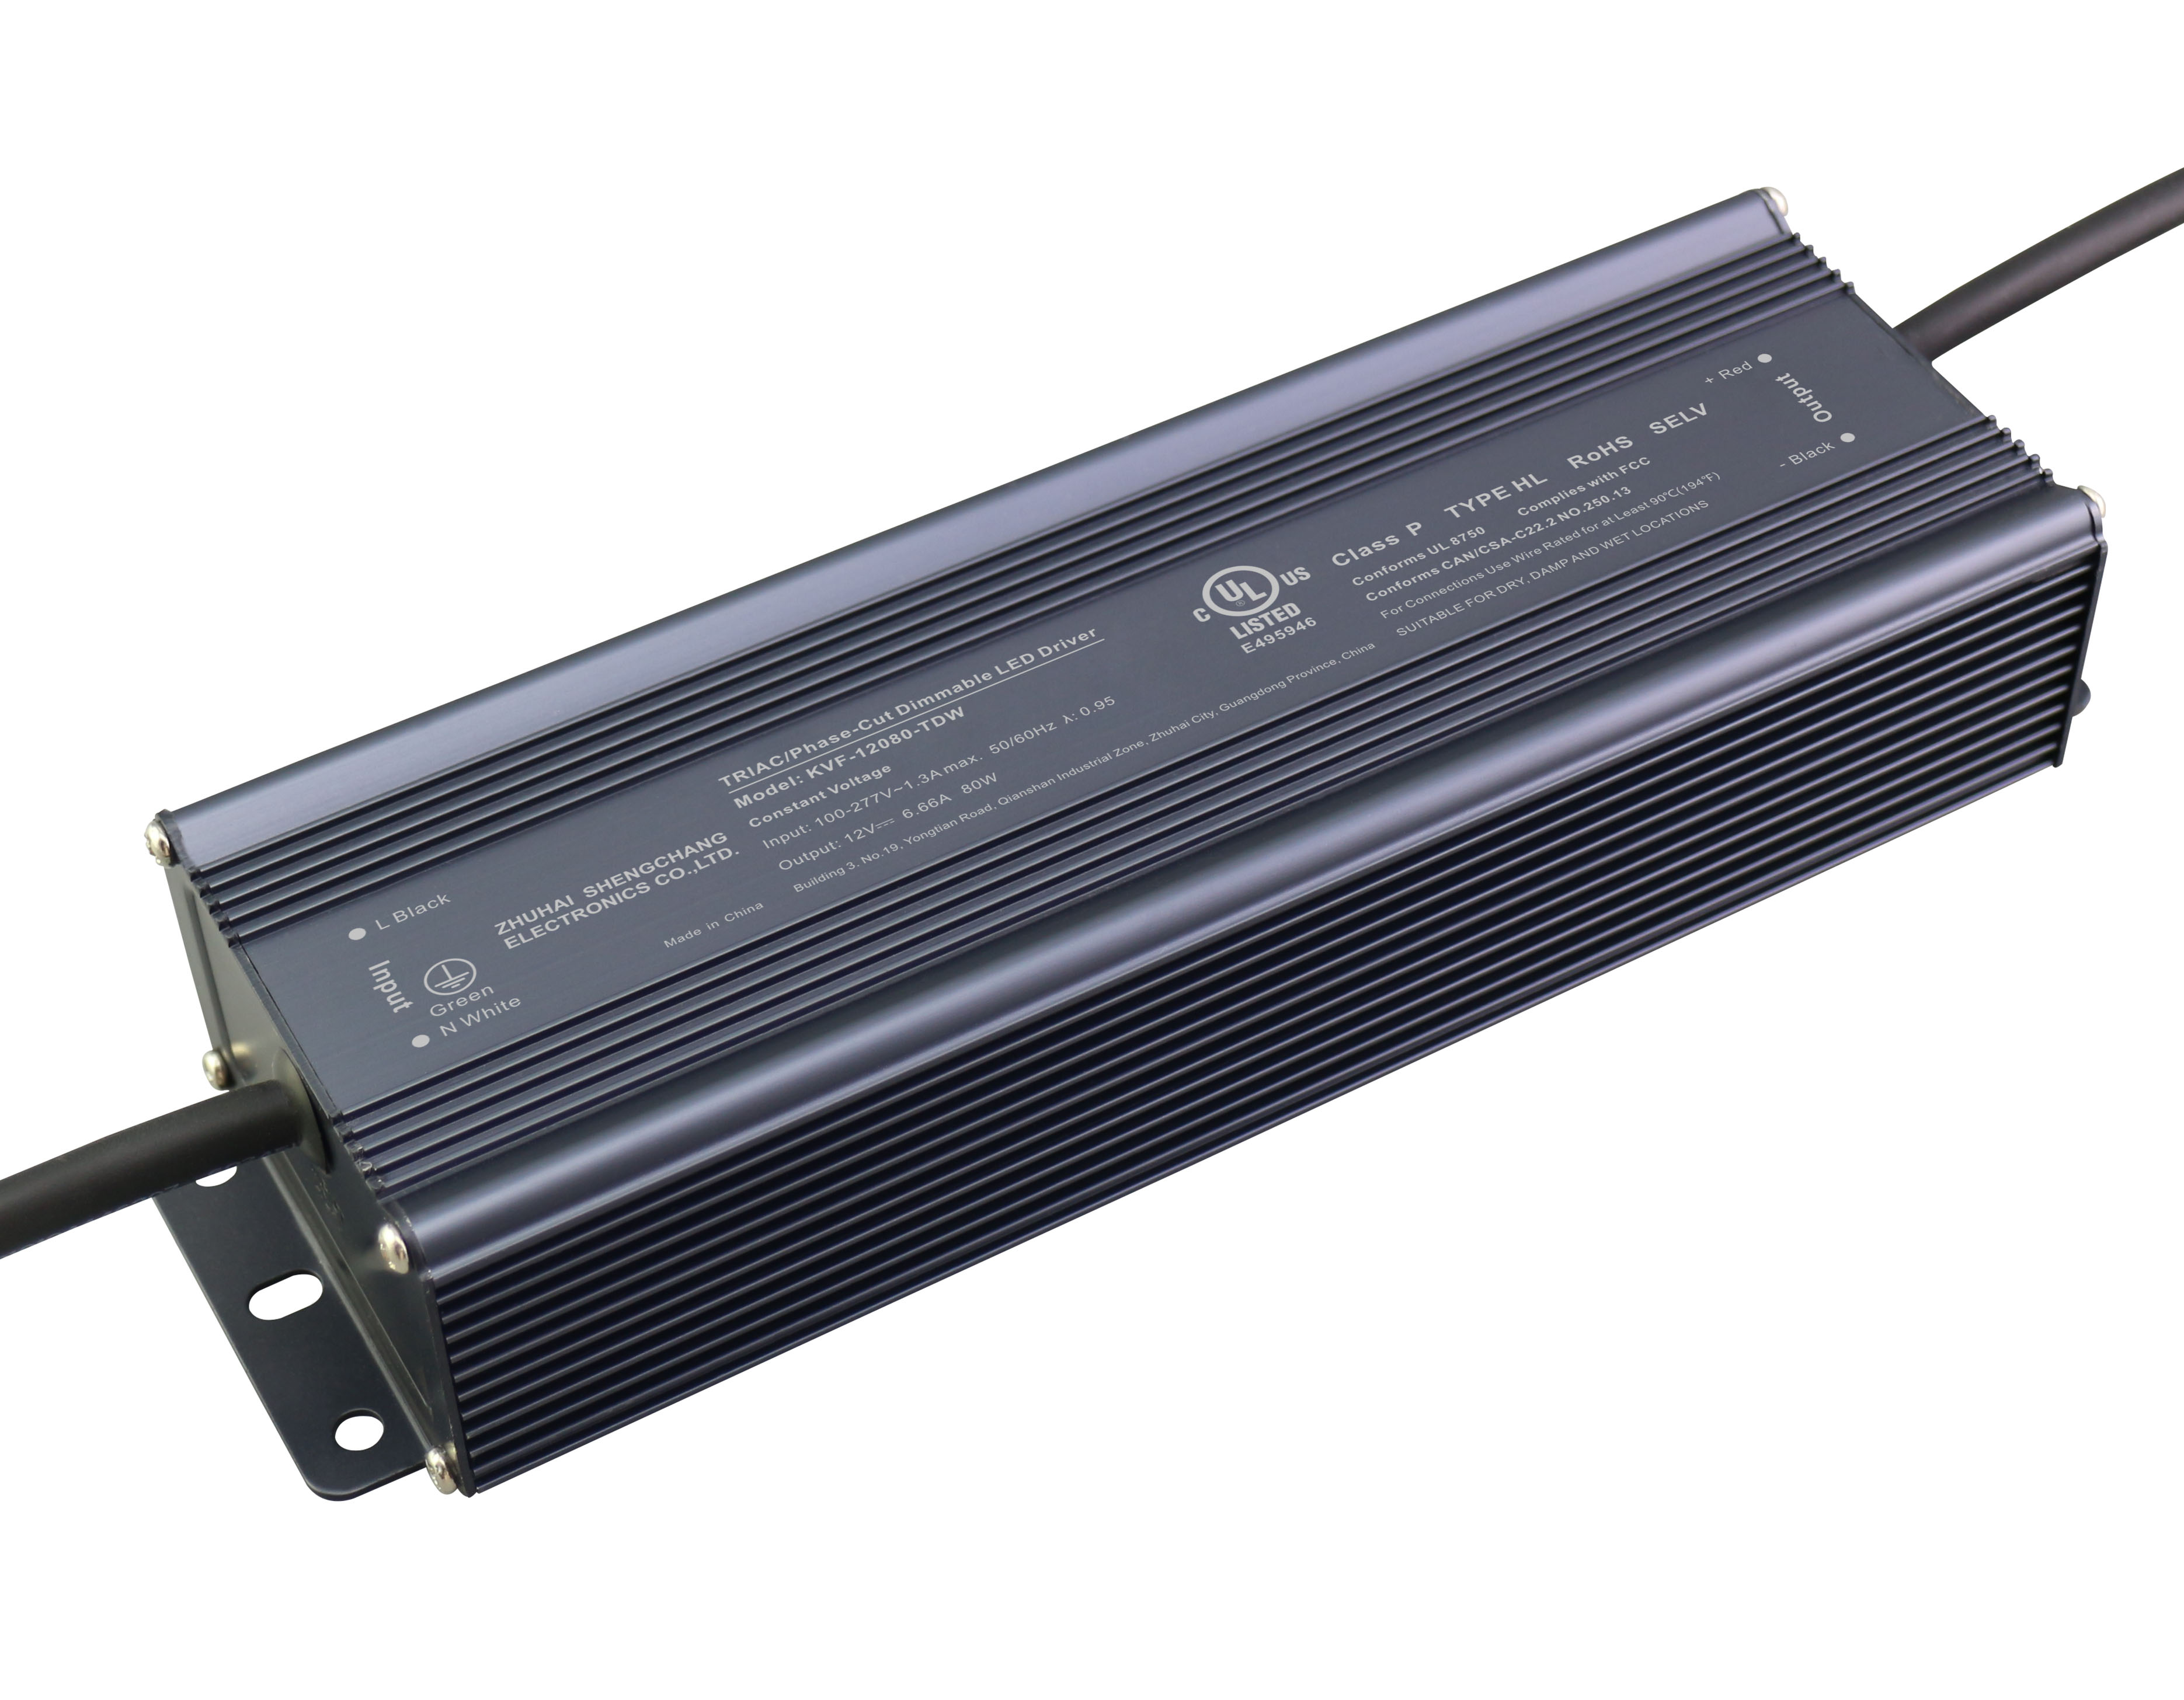 KVF-TDW Series 80W 96W Constant Voltage Triac Dimmable LED driver